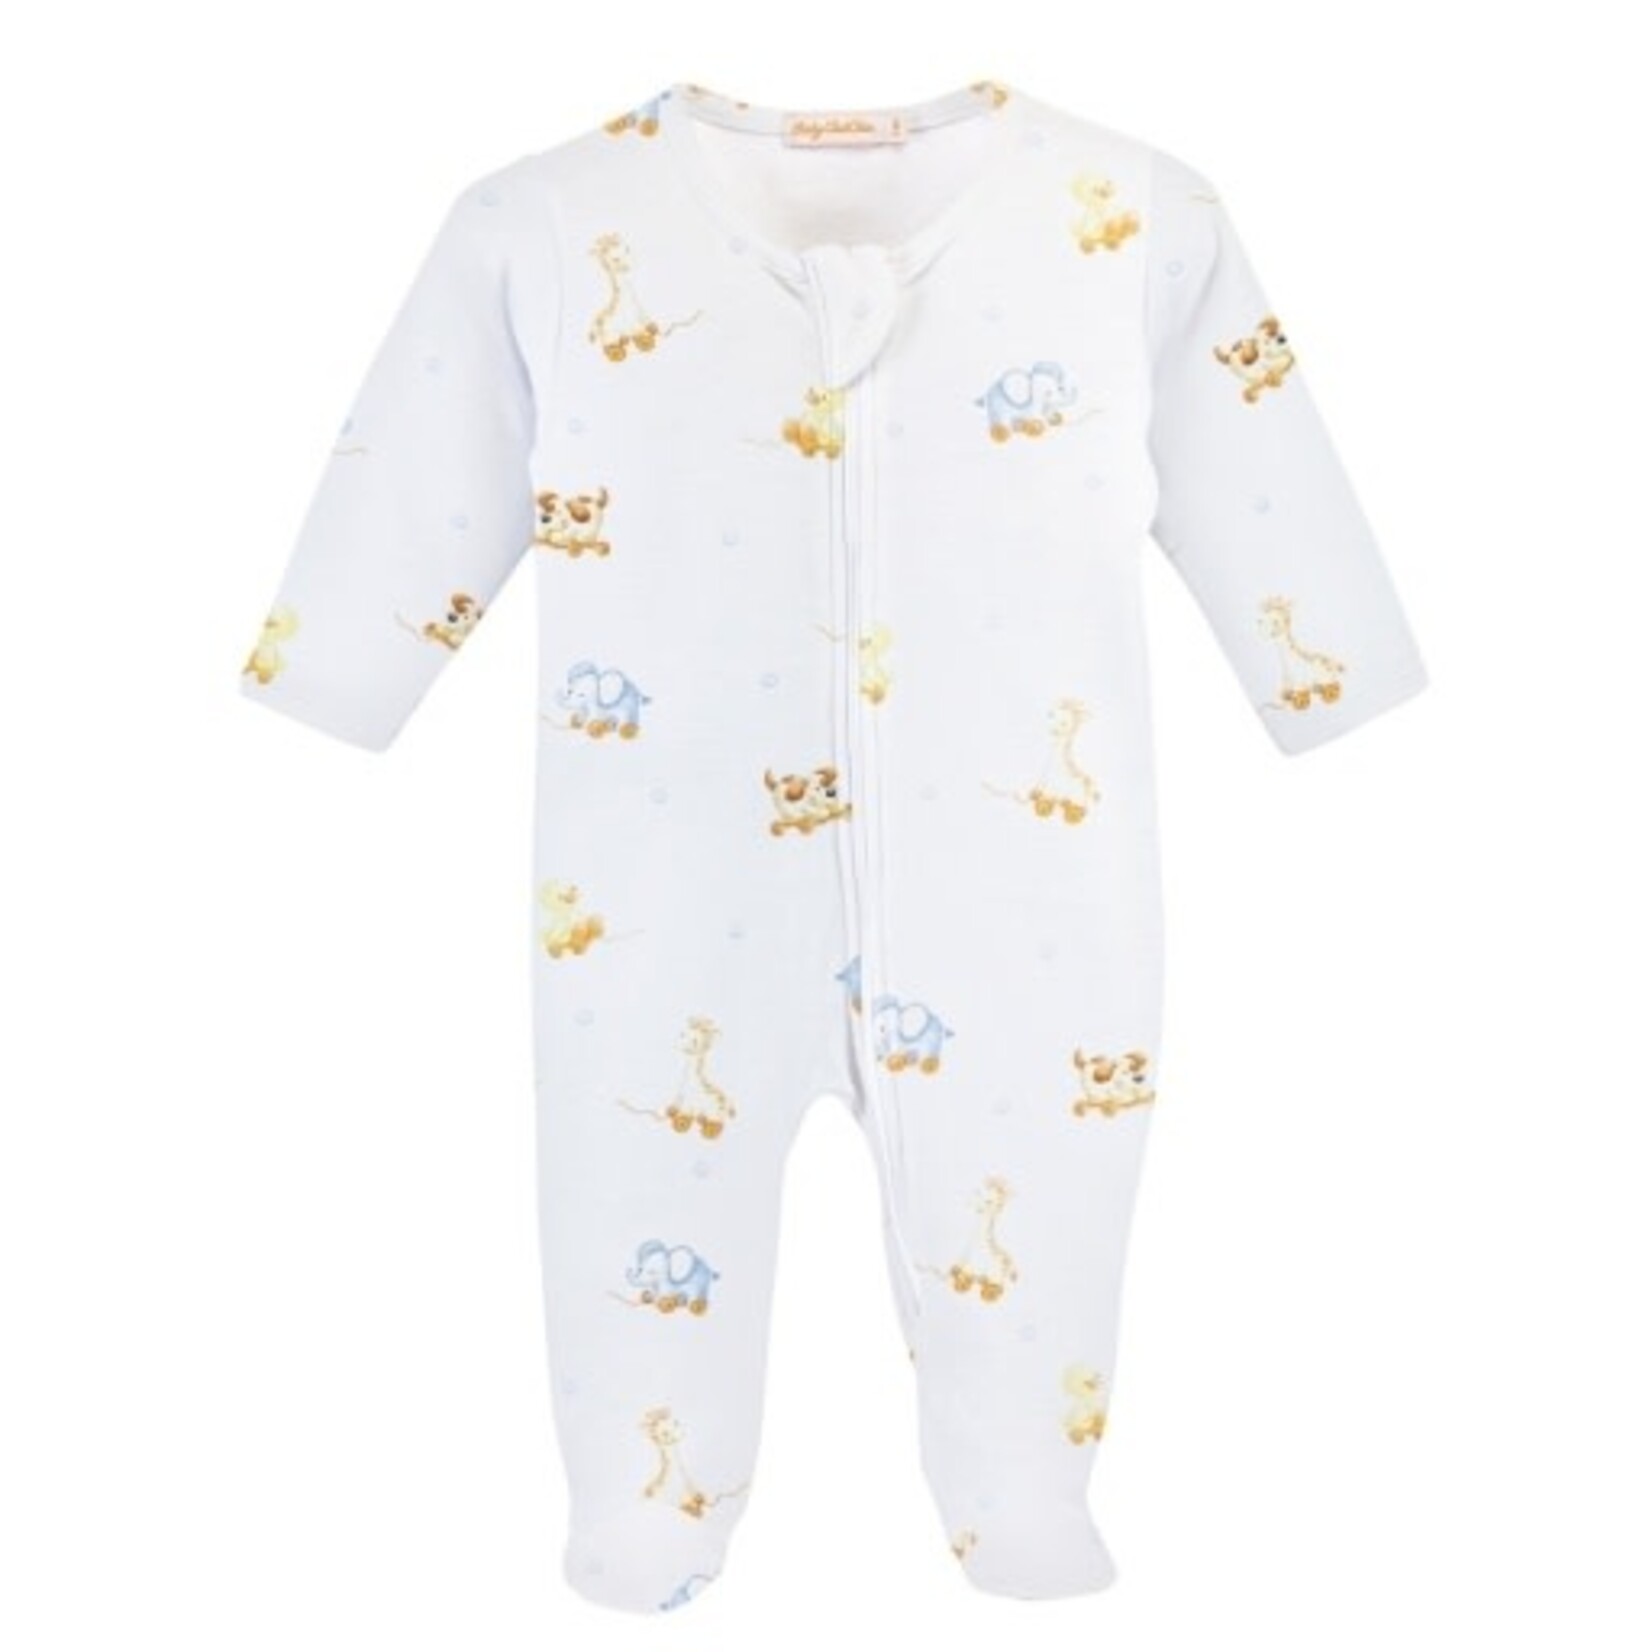 Baby Club Chic sweet toys zipped footie